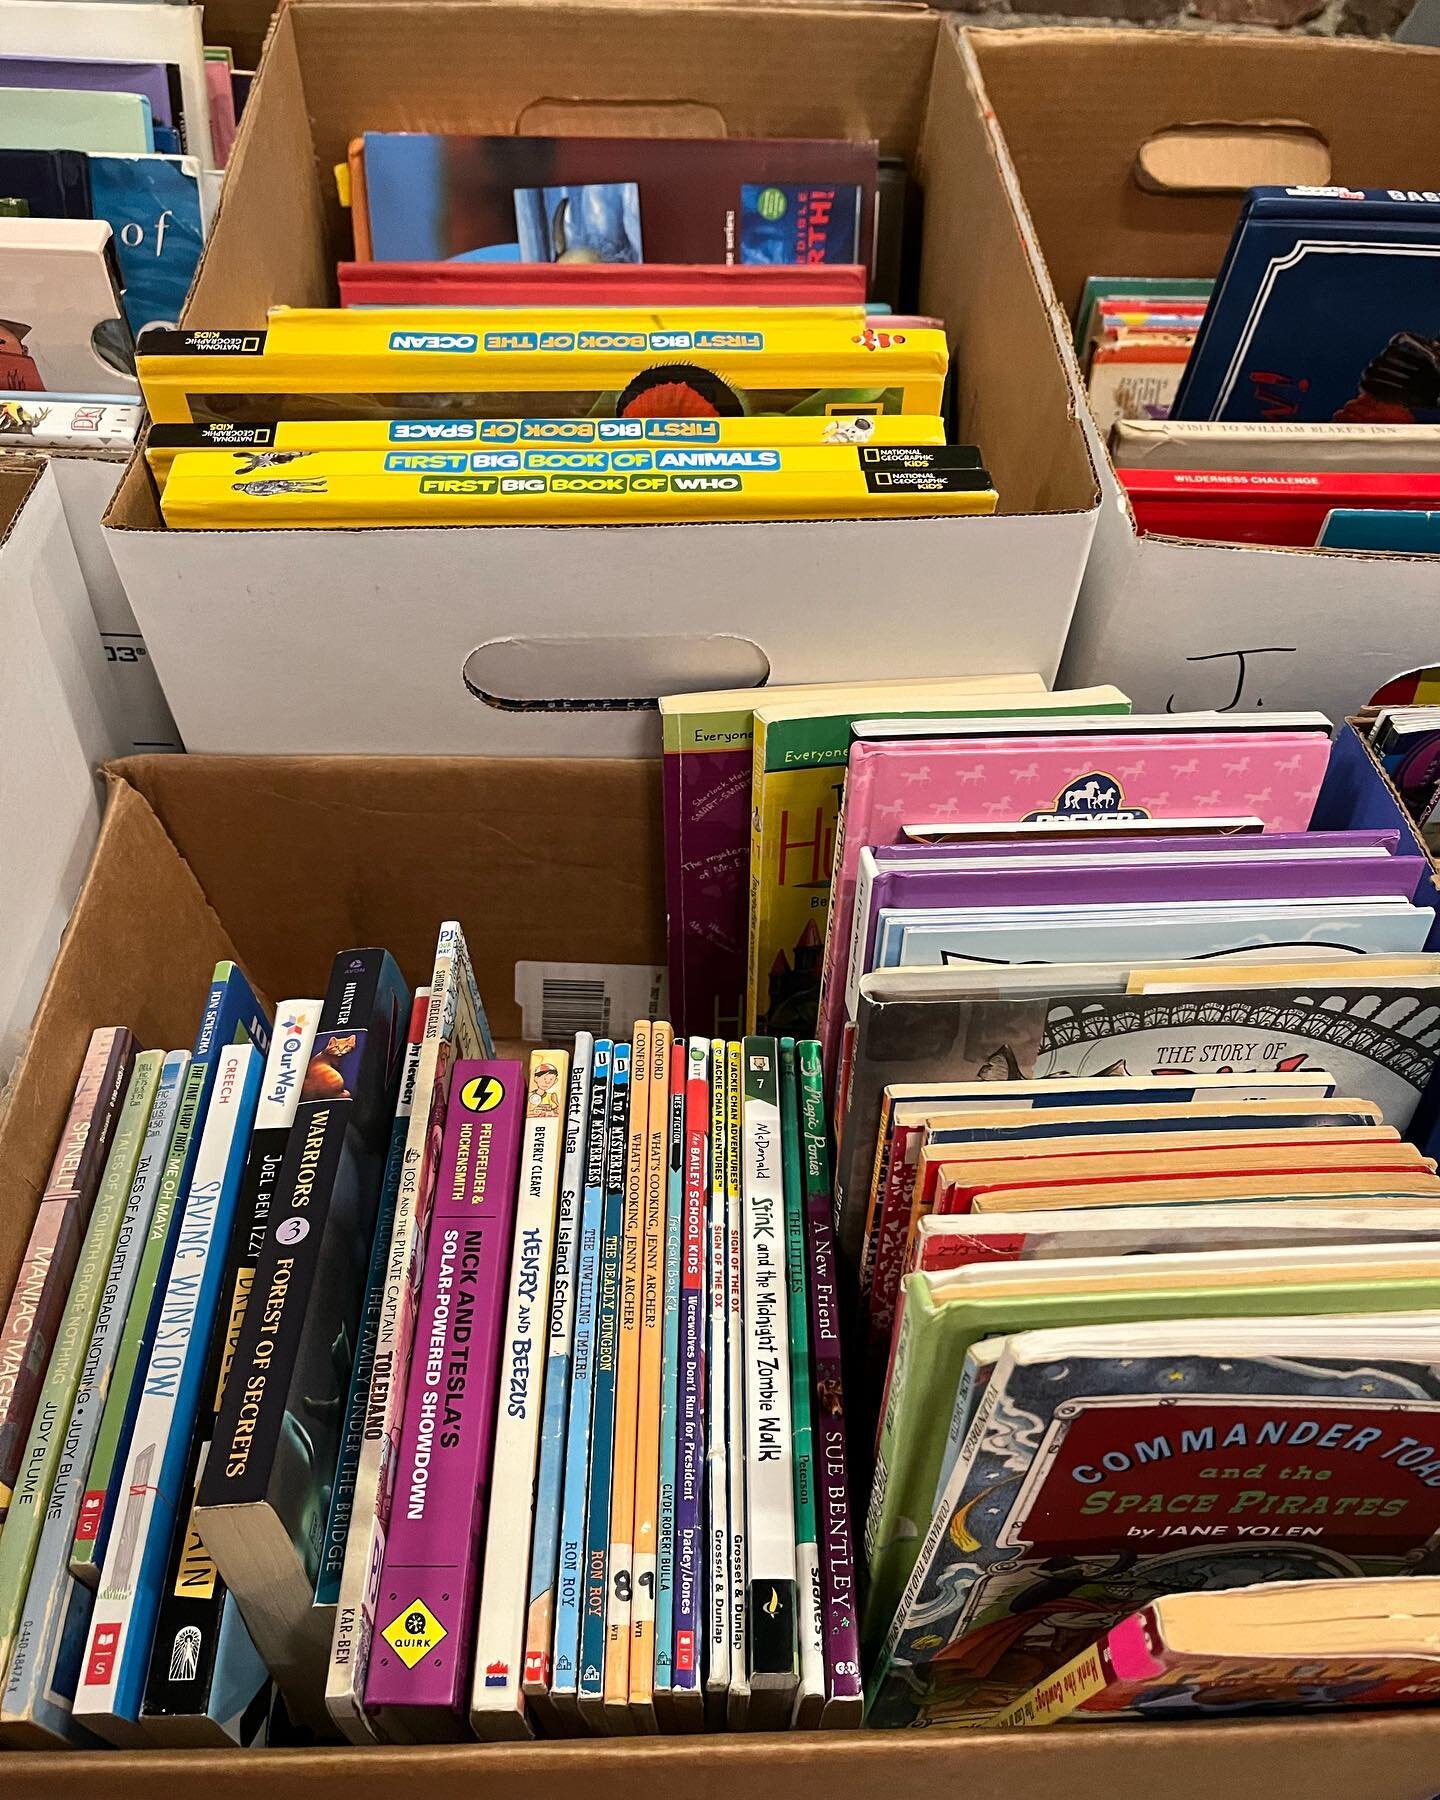 We are here rain or shine! Come join us today from 12-4pm at 31 Brattle St. there are still plenty of great books left!

 From 2-4pm we will have a $5 bag sale. Bring your own bag and fill it for $5!

#harvardsquare #cambridgema #usedbooks #booksale 